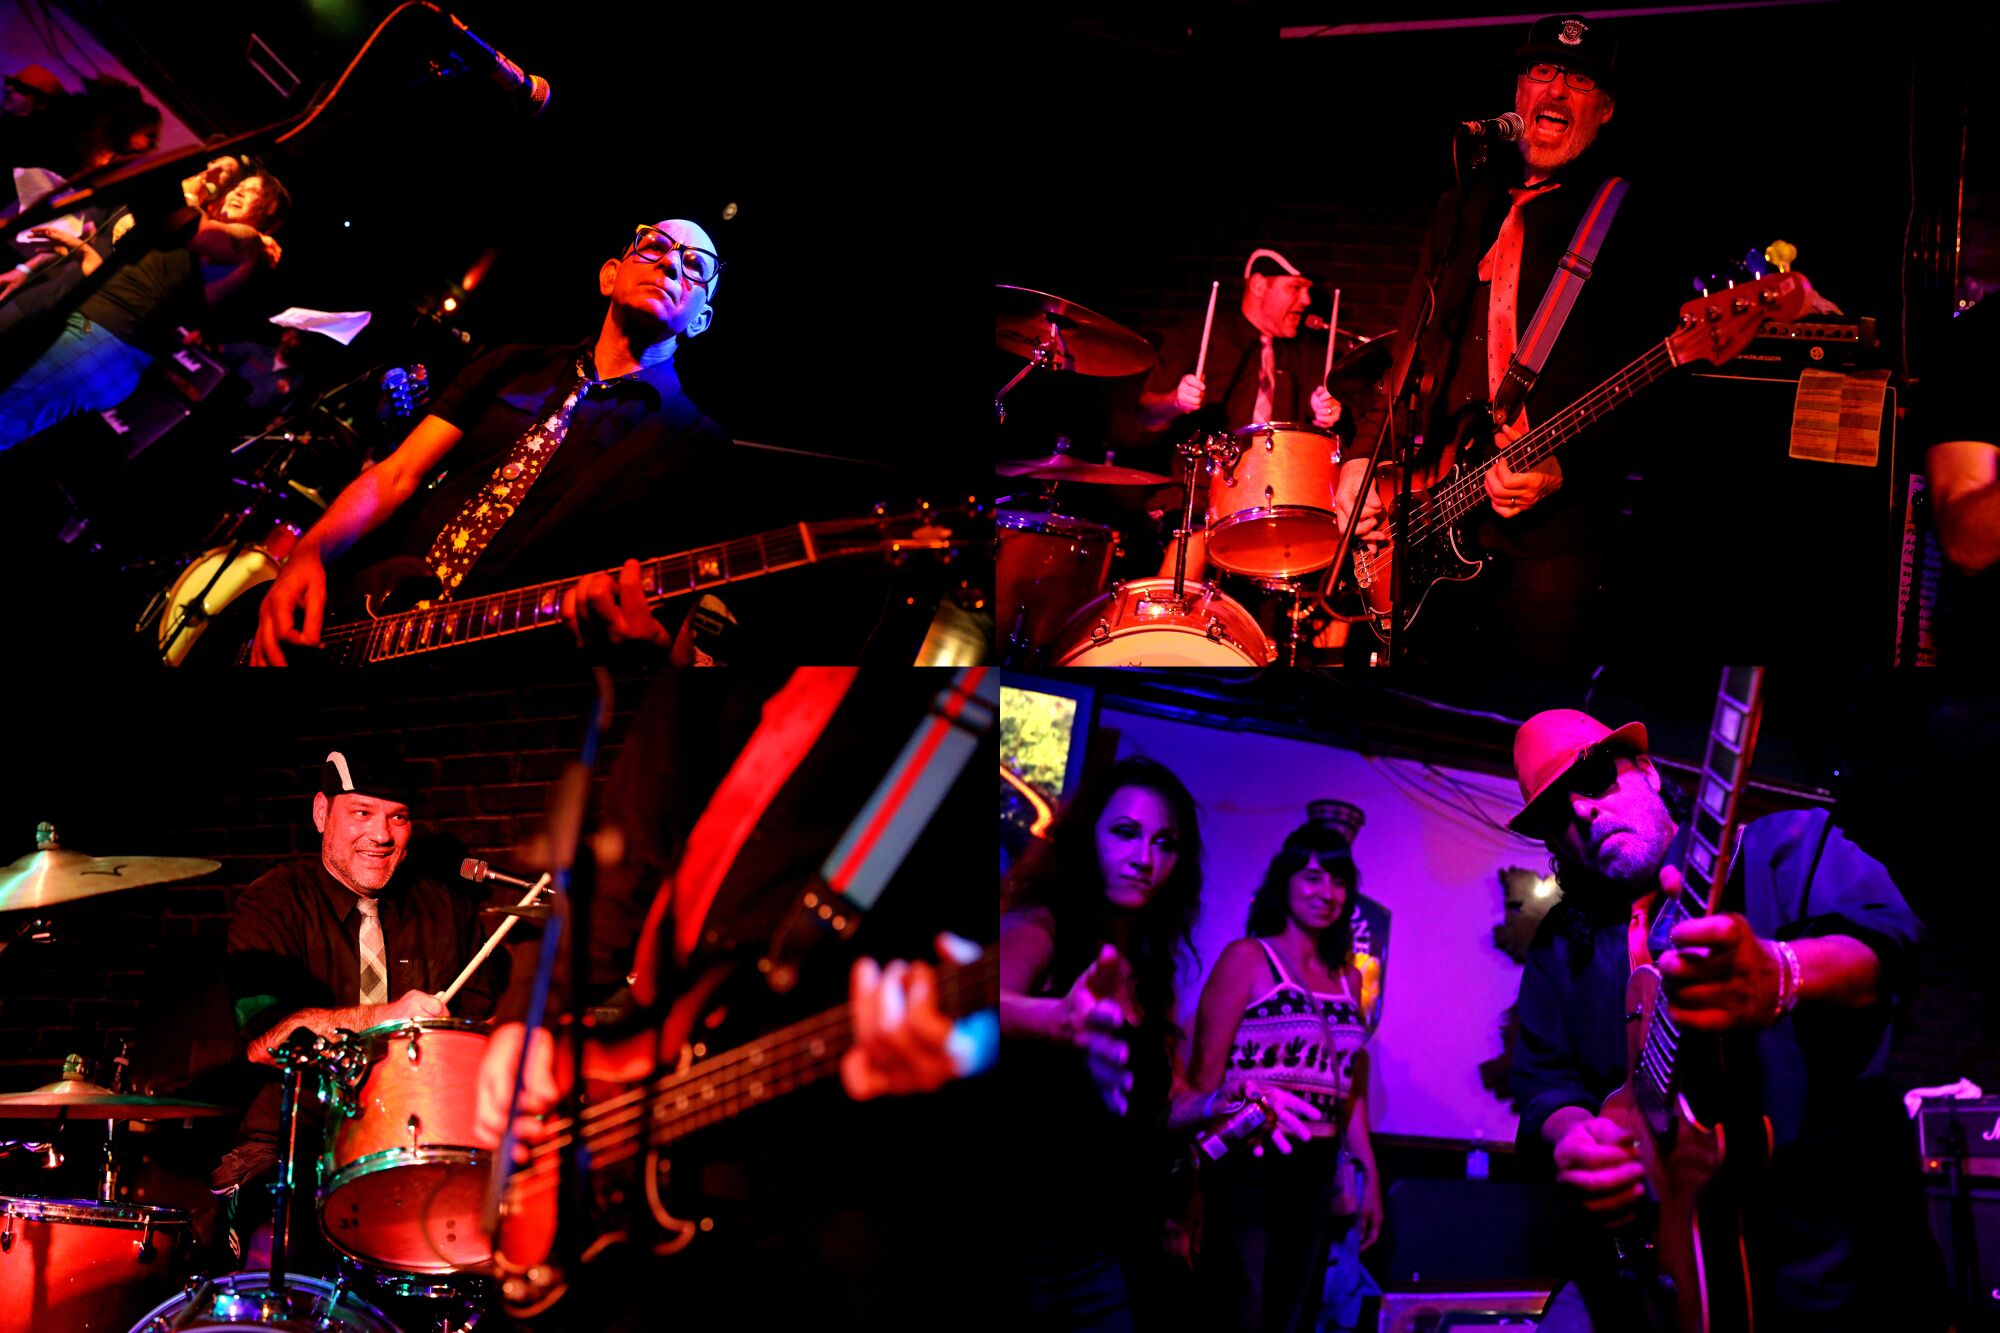 Four photos of the Punk Rock Karaoke Band members playing guitars and drums